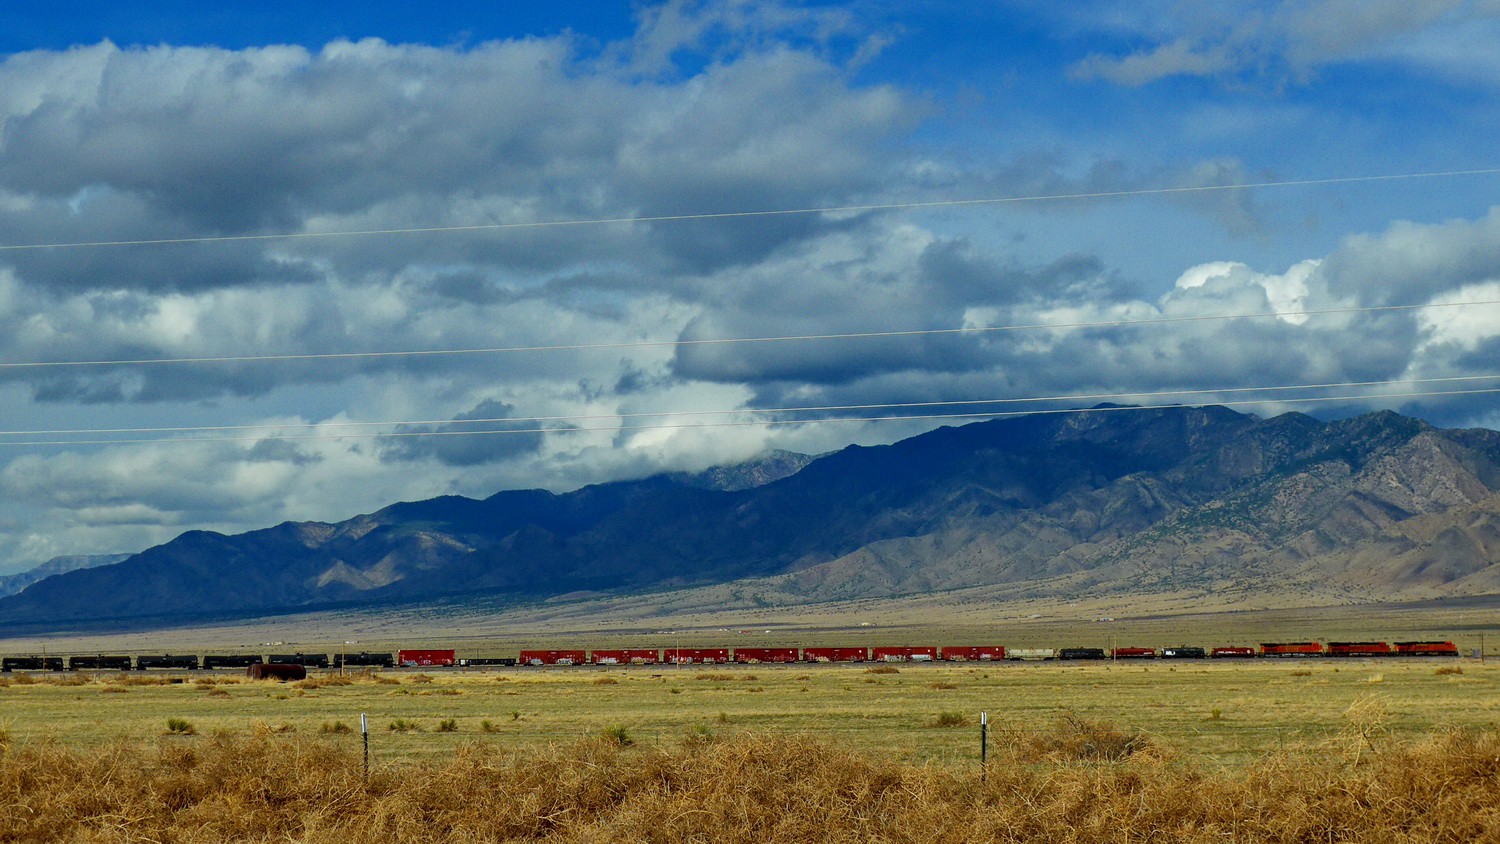 Long, long train on our drive to Albuquerque